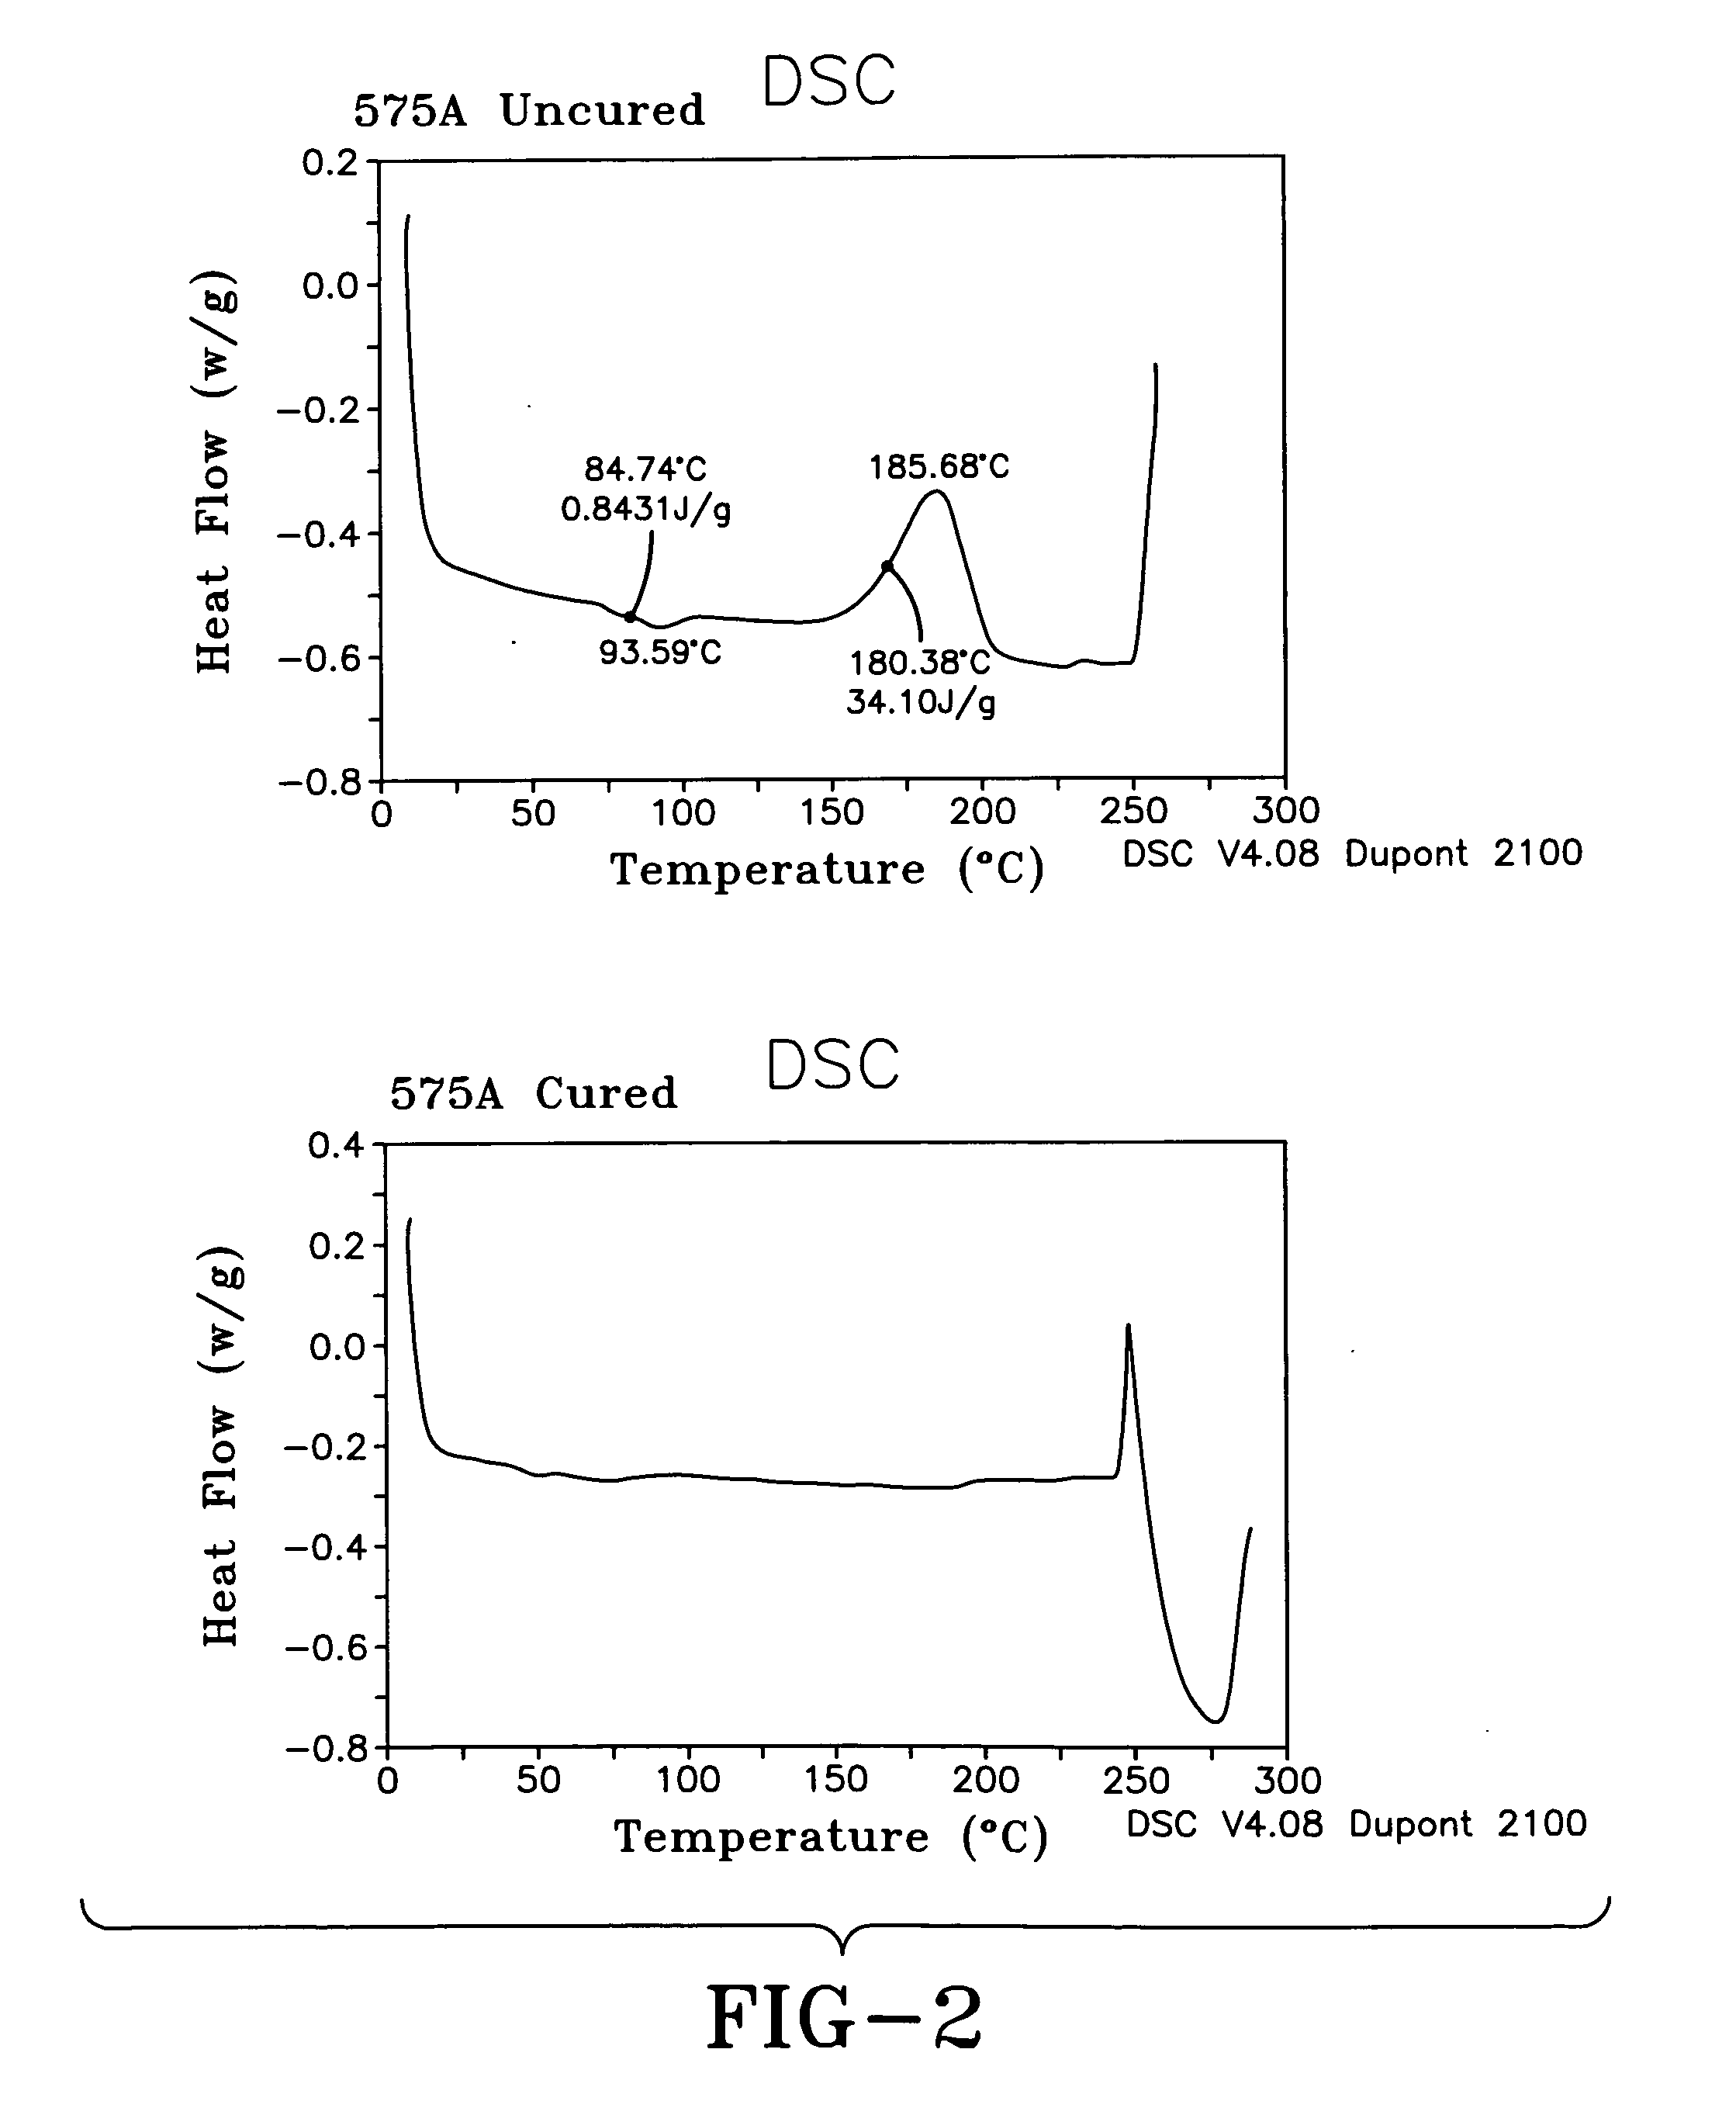 Power transmission products having enhanced properties